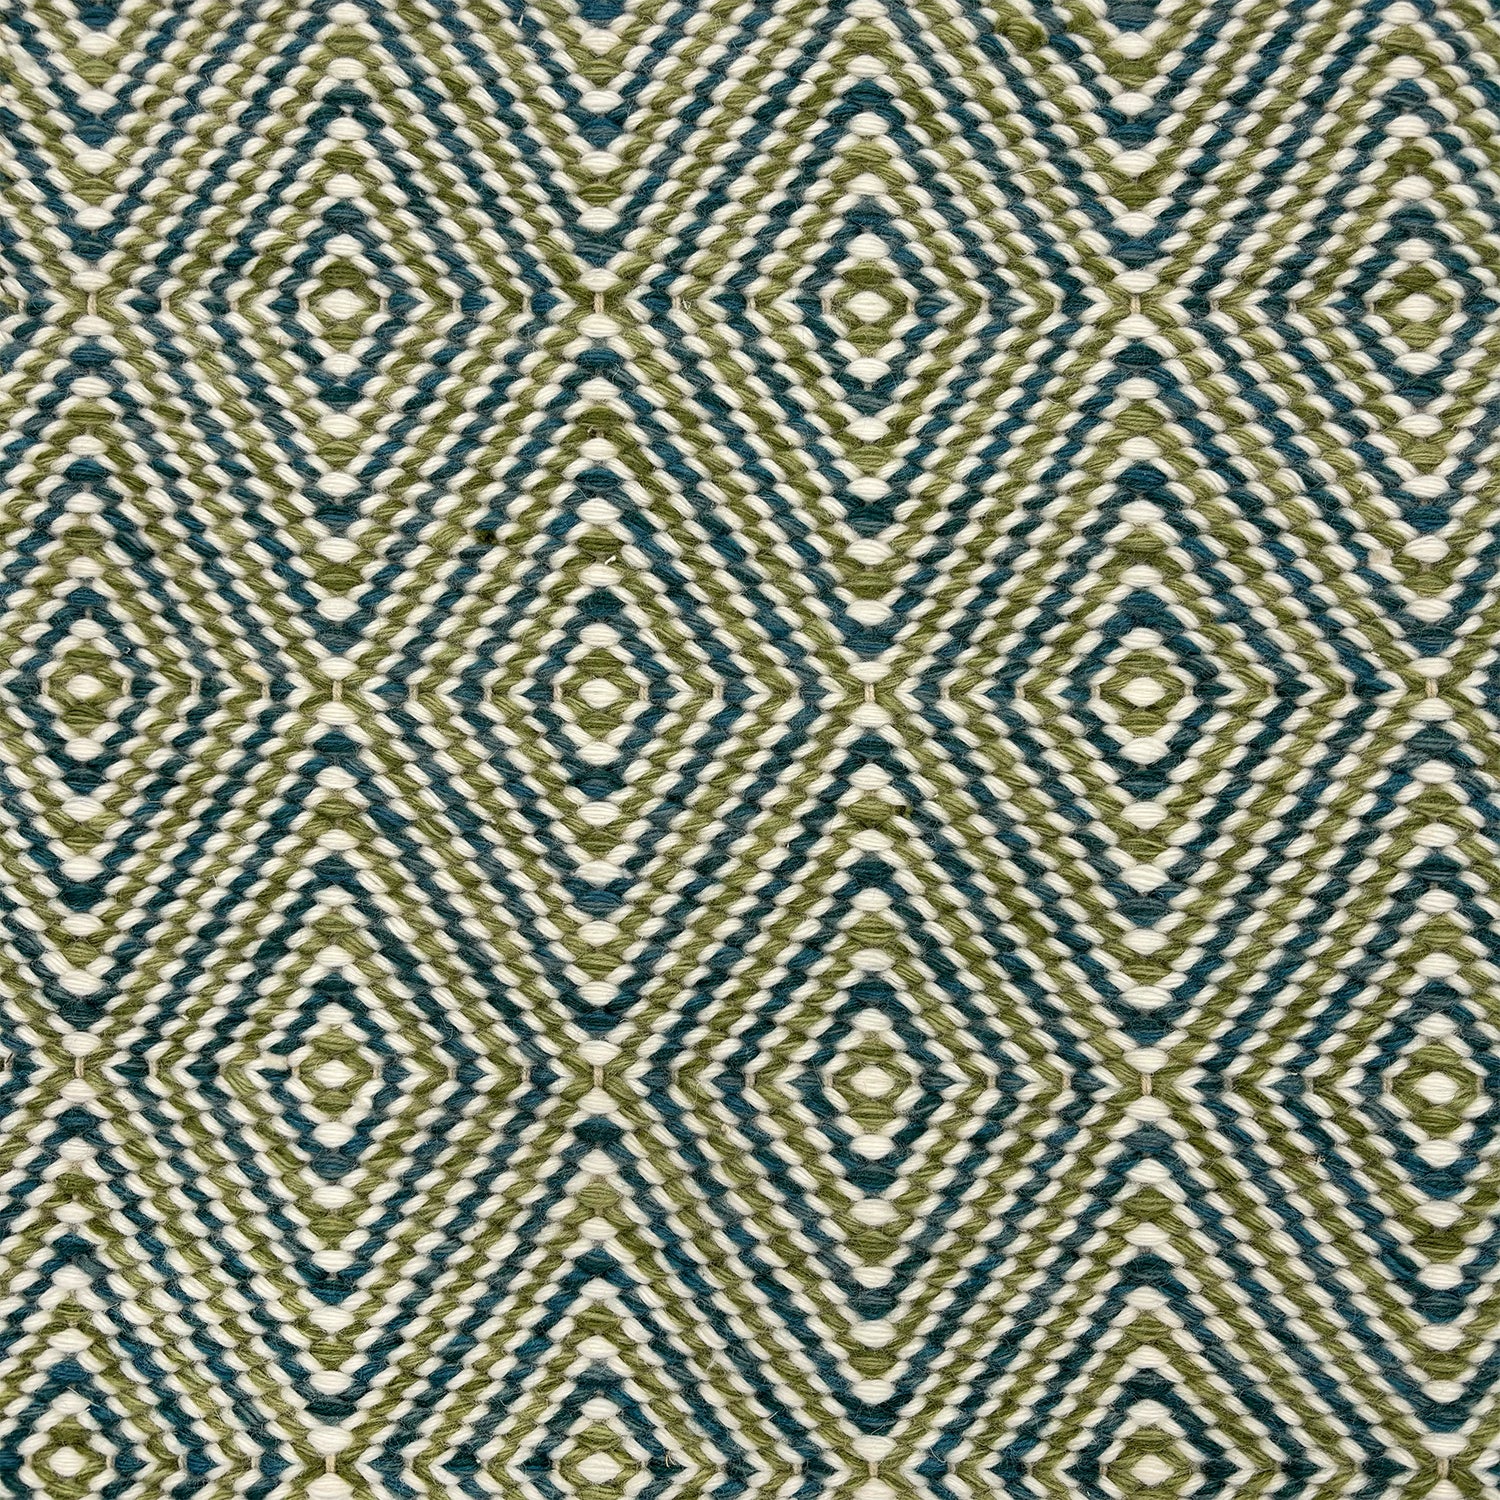 Detail of a flatwoven rug with a diamond pattern in white, blue and green.